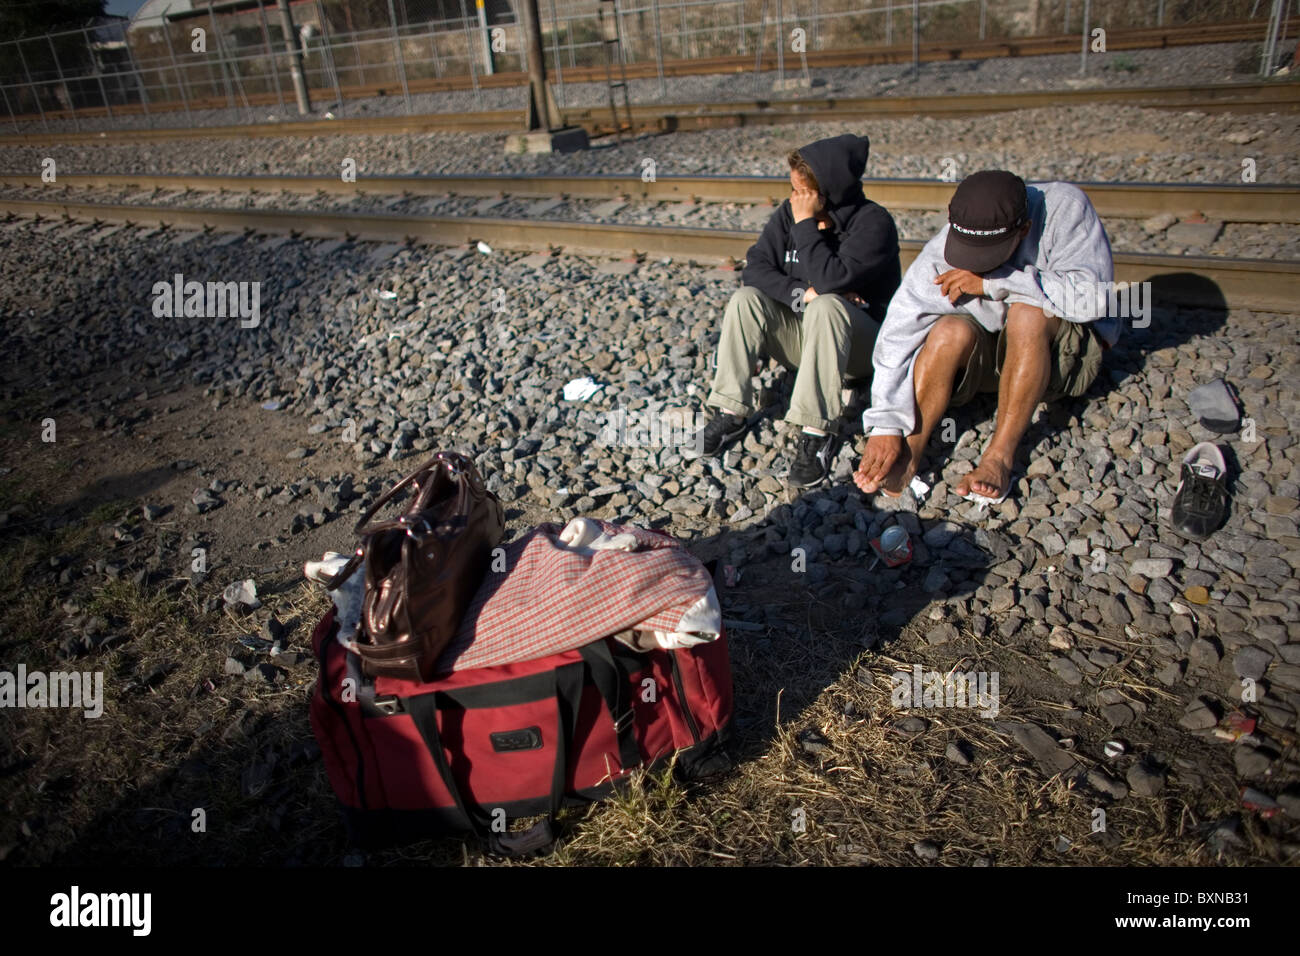 Central American migrants traveling across Mexico to work in the United States wait along the railroad tracks in Mexico City Stock Photo